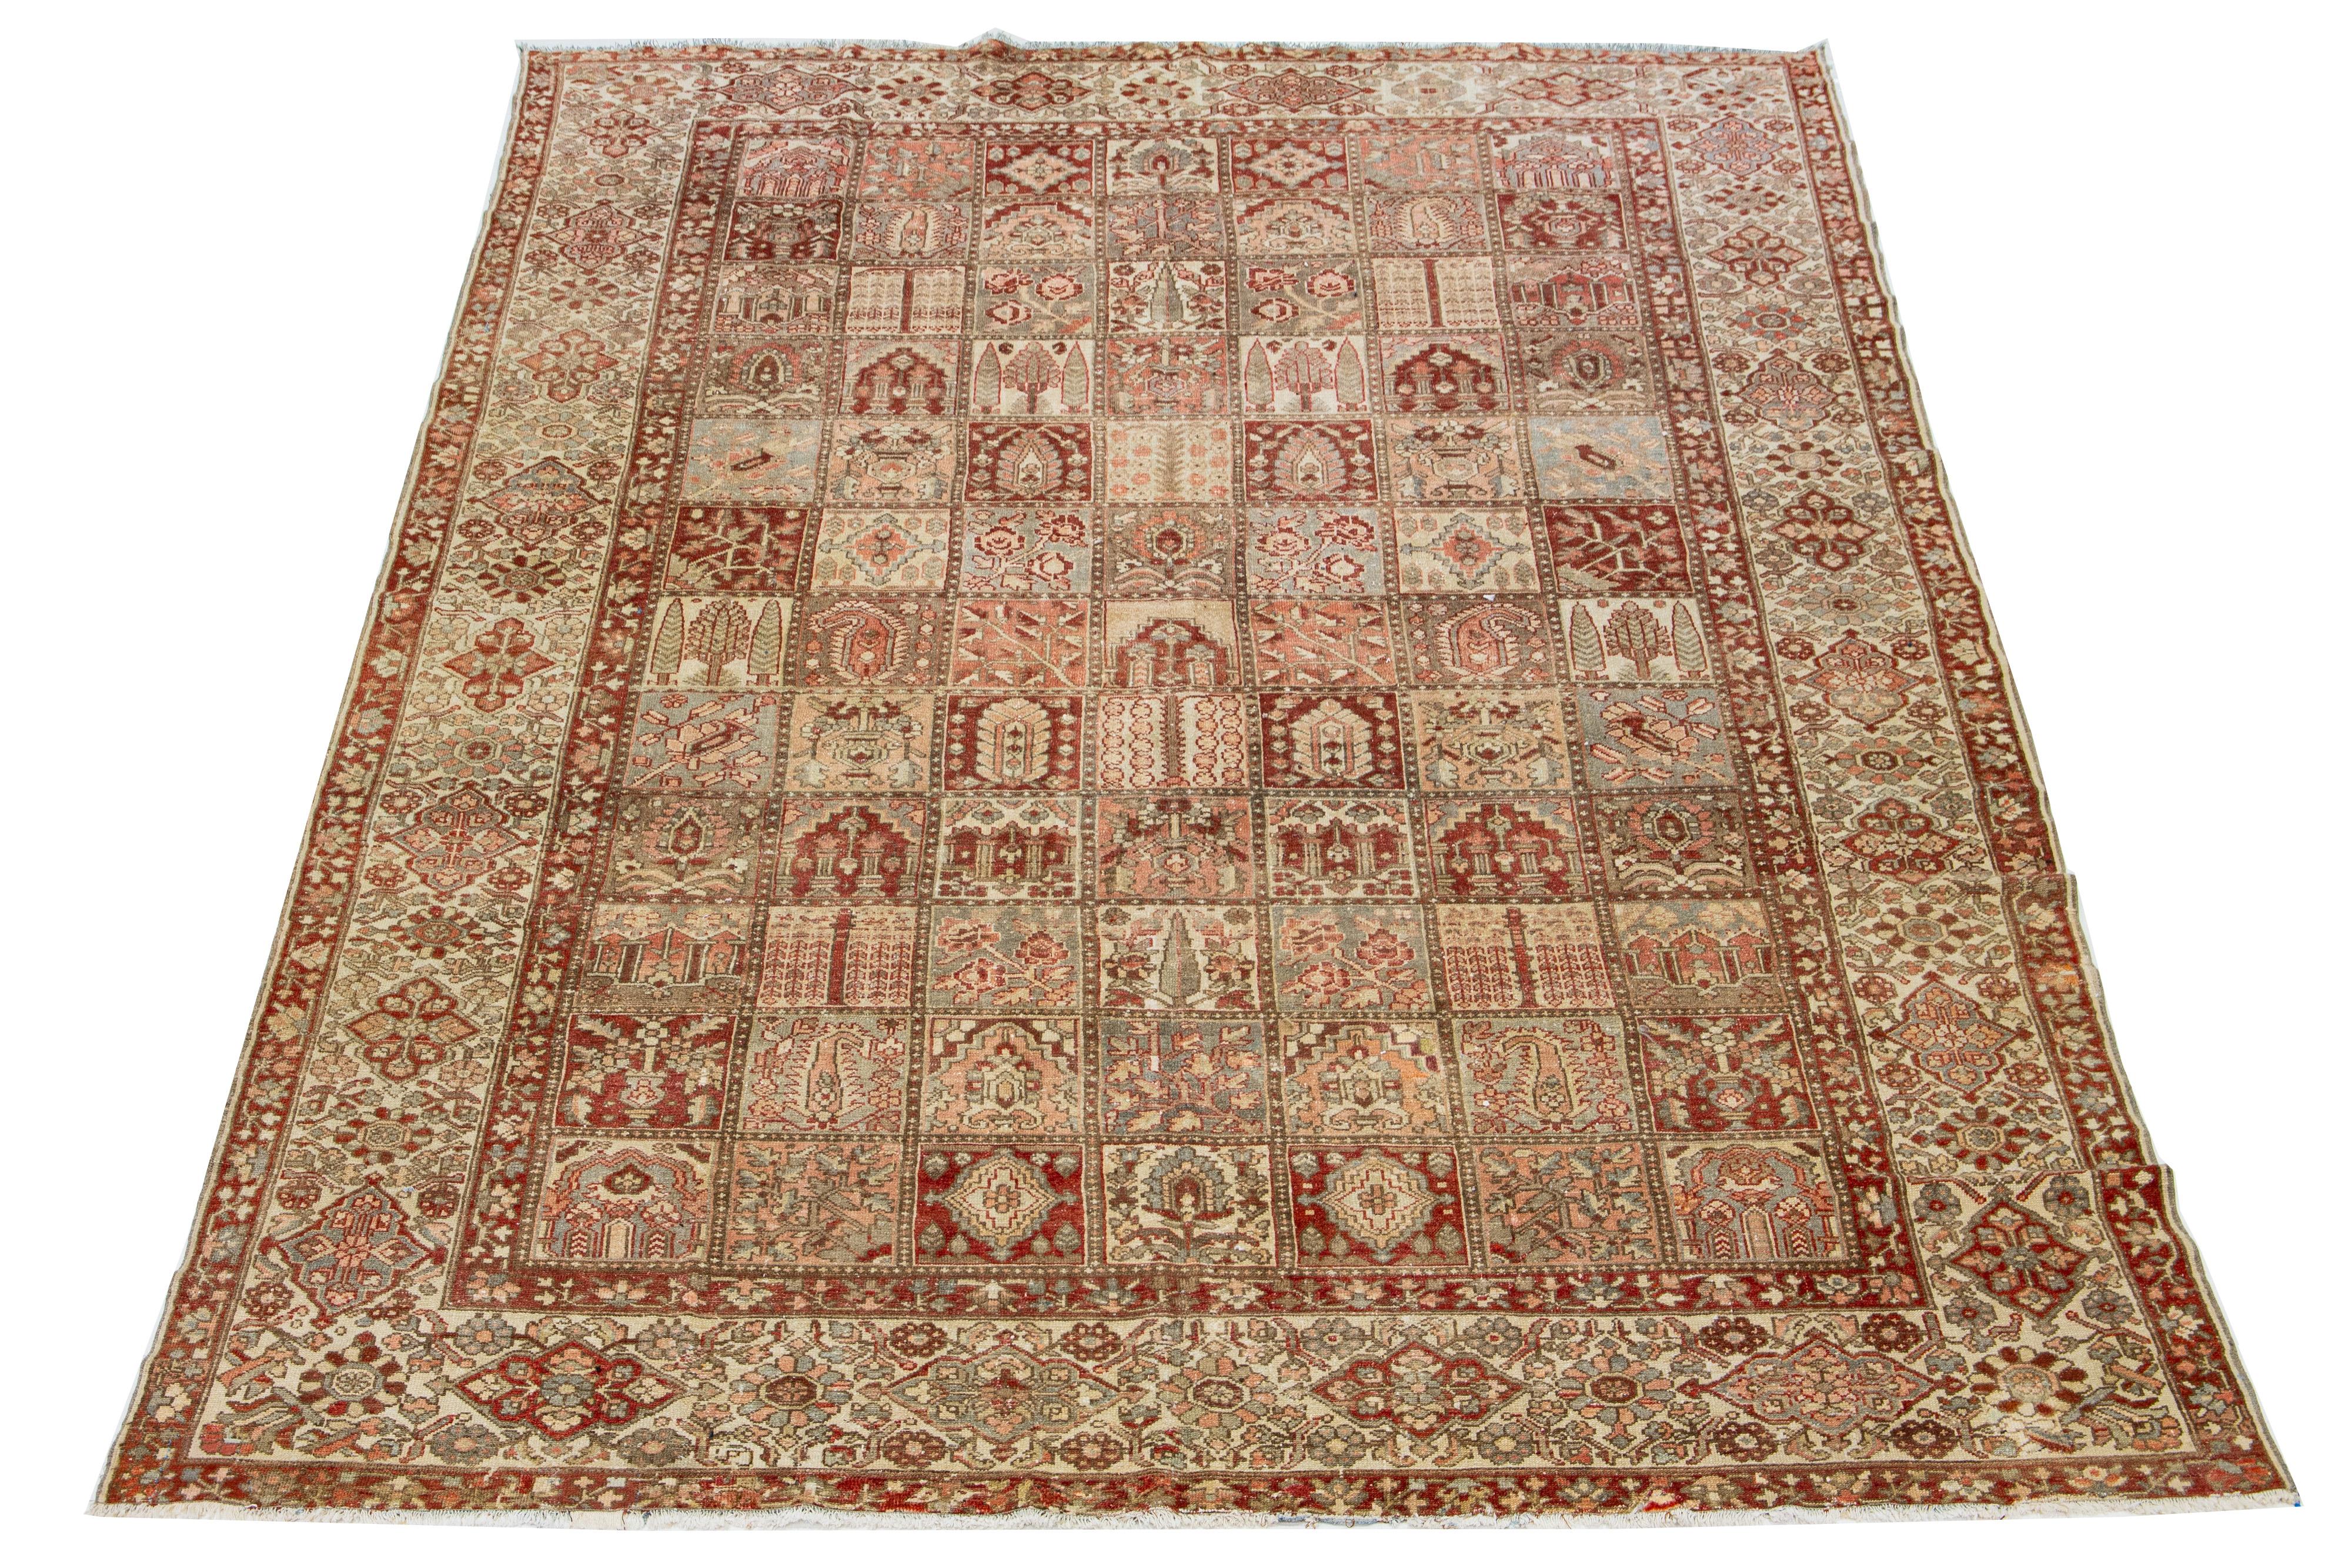 Beautiful Antique Bakhtiari hand-knotted wool rug with a red-rust, blue, beige, and peach color field. This Persian piece has a classic floral pattern.

This rug measures 10'9